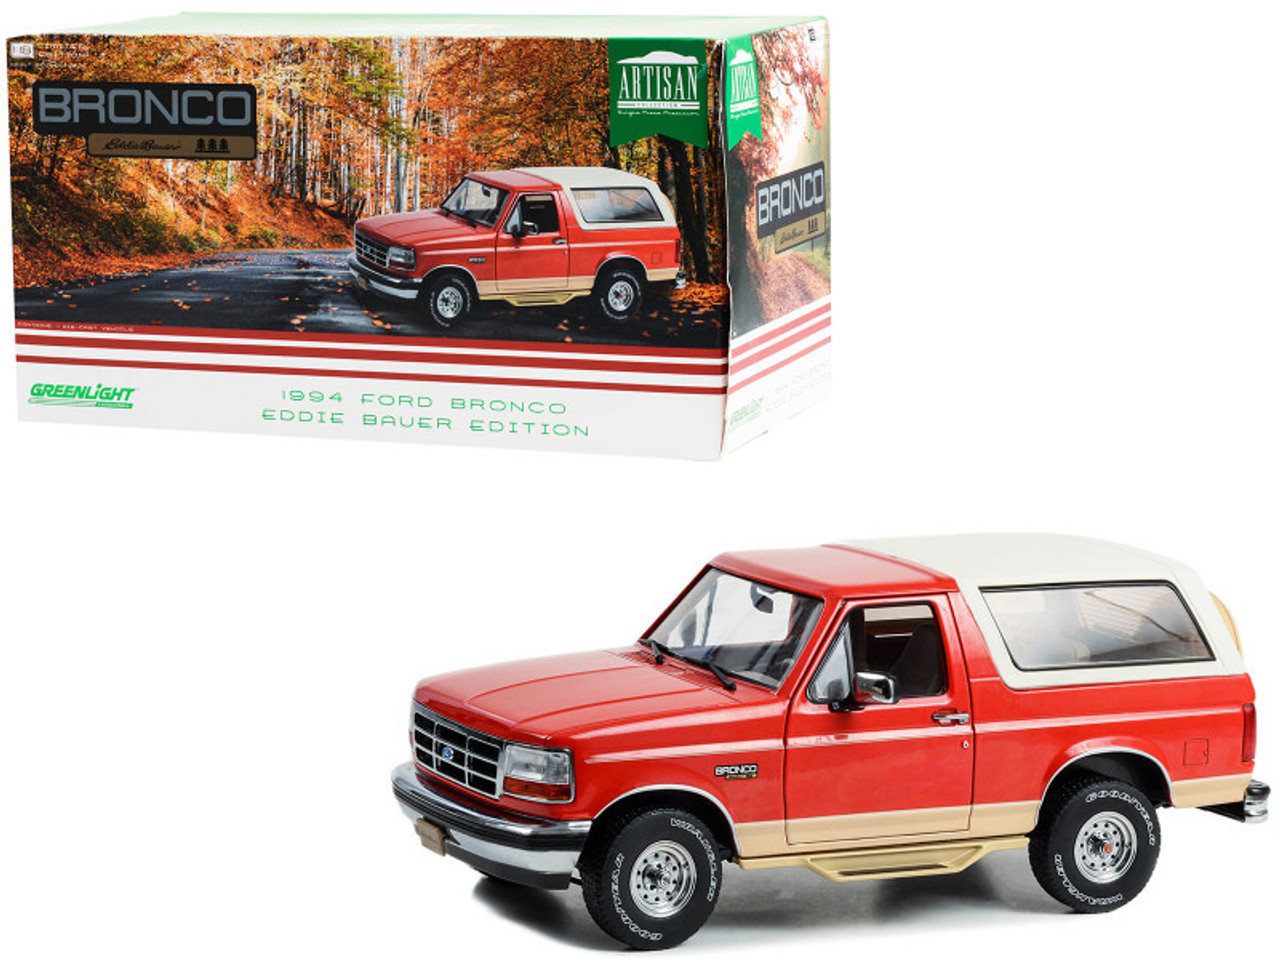 1994 Ford Bronco "Eddie Bauer Edition" Electric Red Metallic and Tucson Bronze with White Top "Artisan Collection 1/18 Diecast Model Car by Greenlight